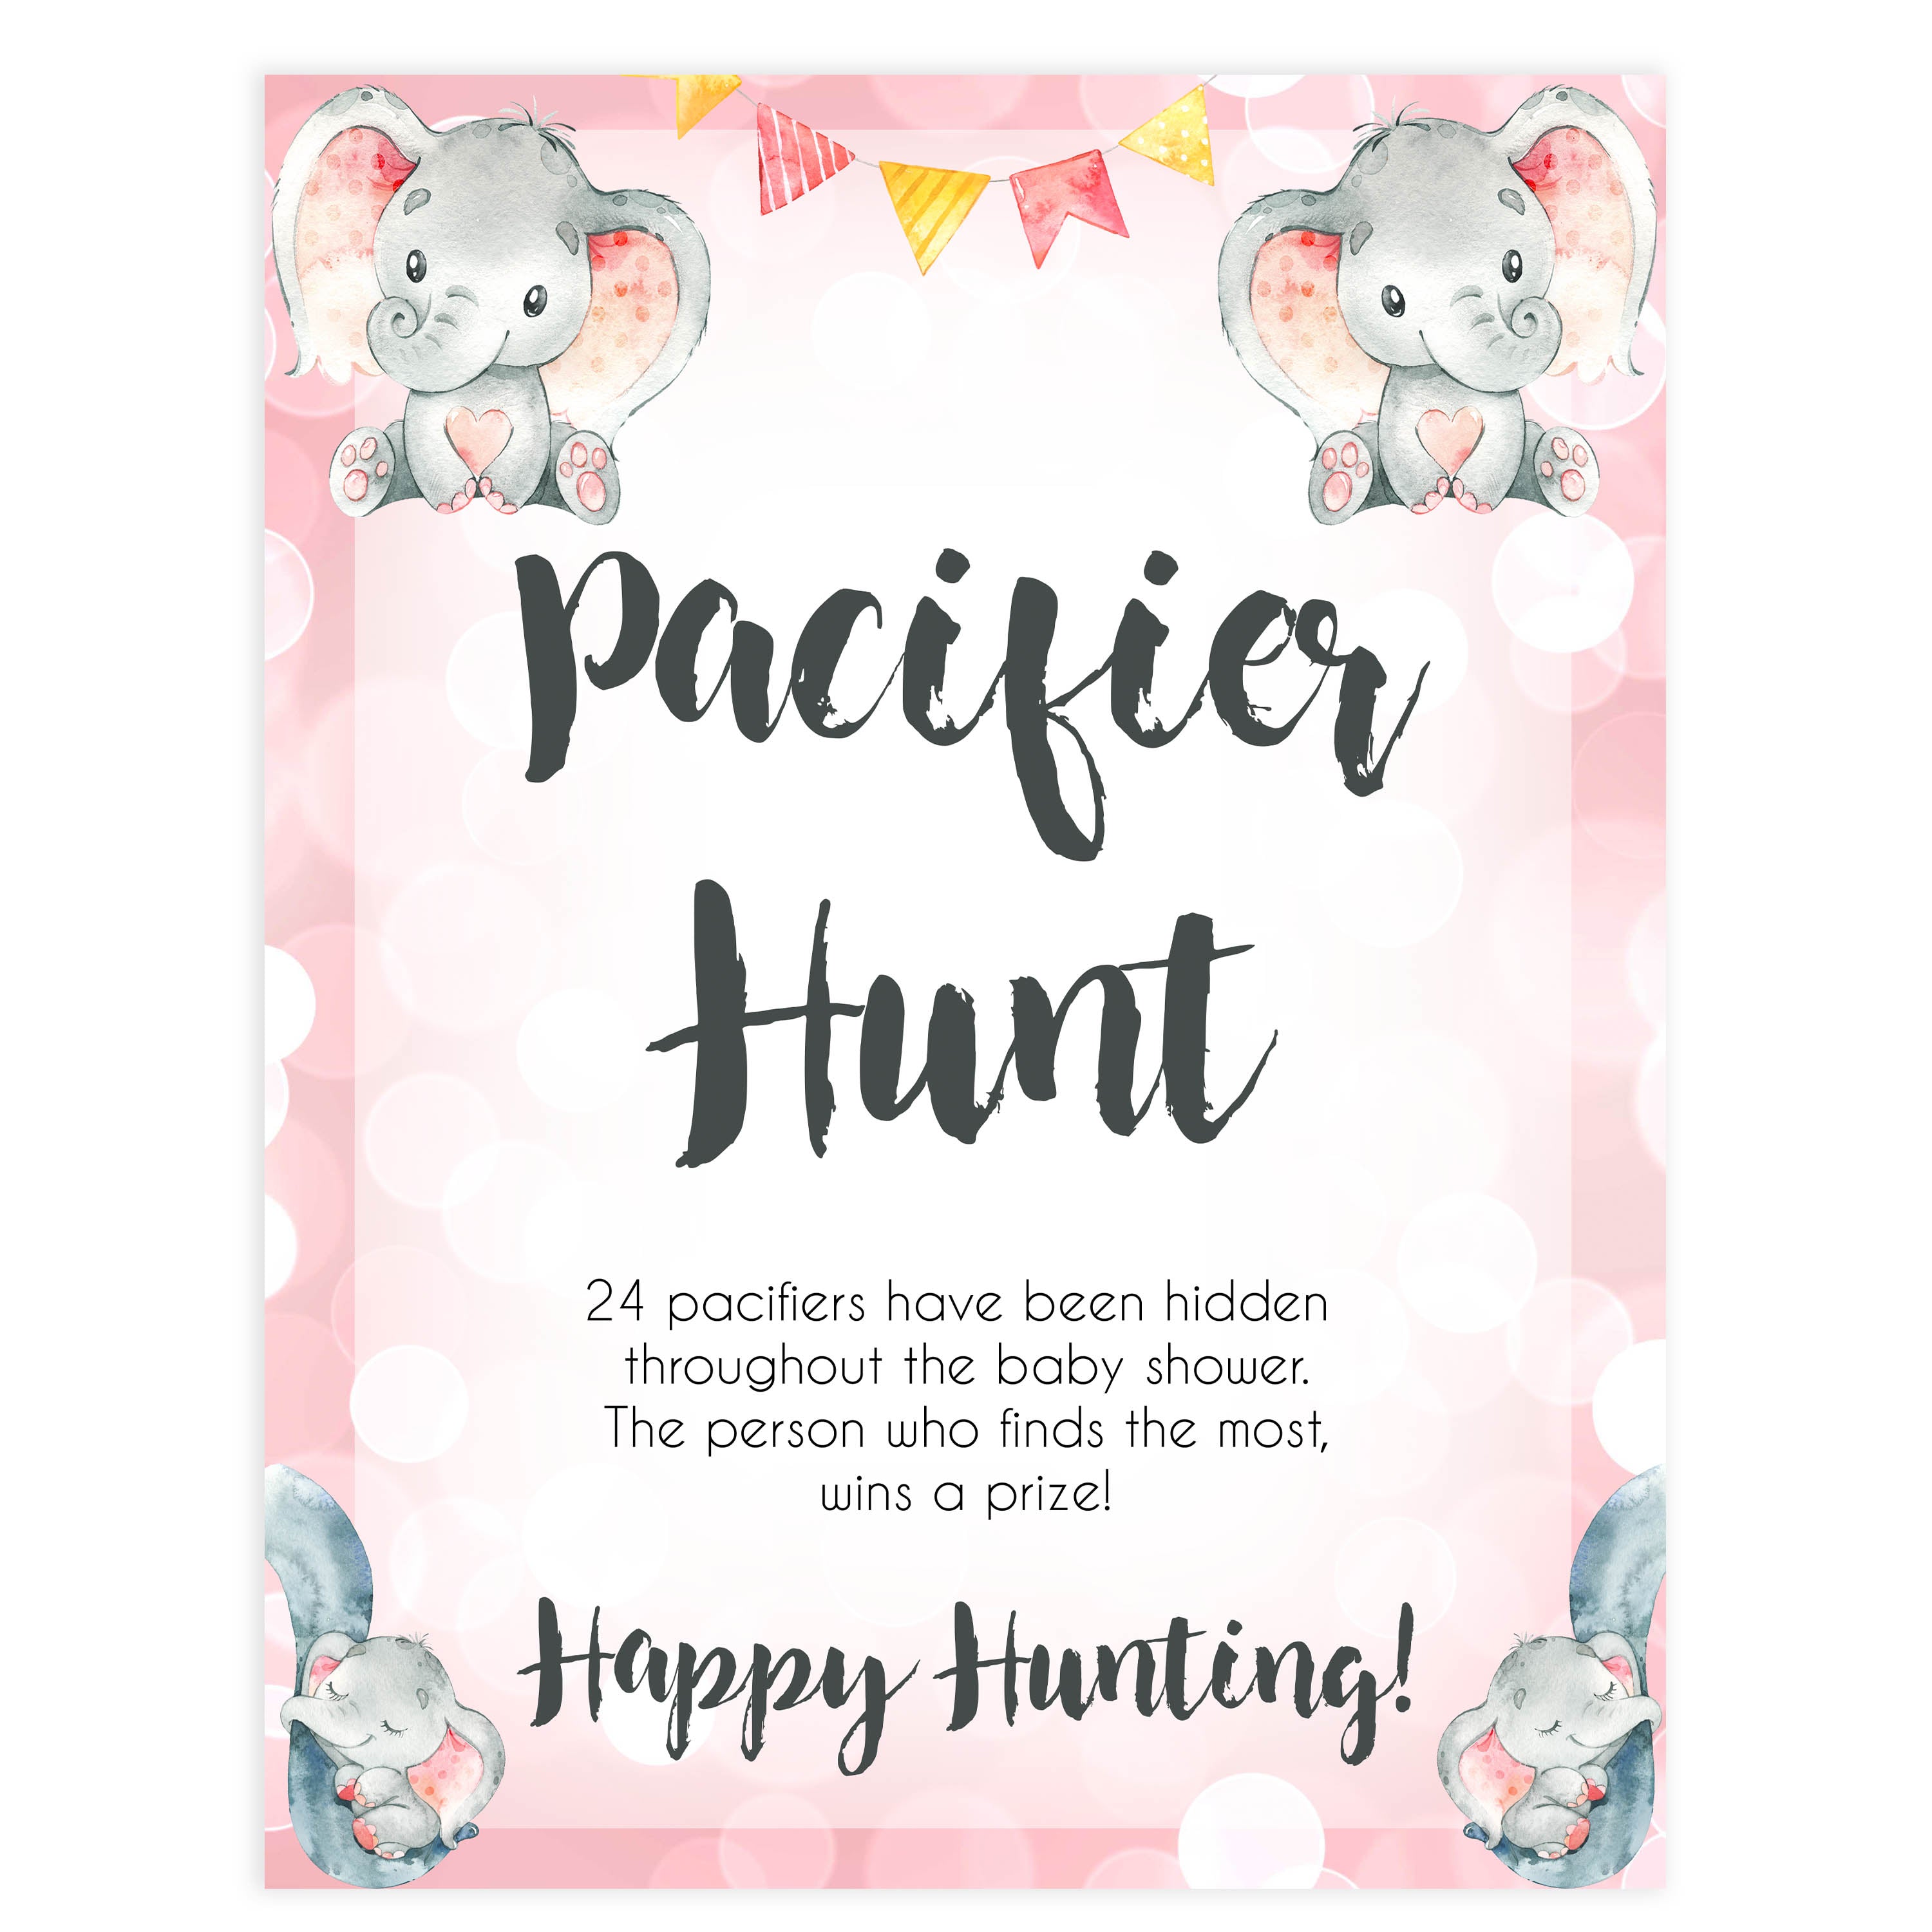 pacifier hunt baby game, Printable baby shower games, fun abby games, baby shower games, fun baby shower ideas, top baby shower ideas, pink elephant baby shower, pink baby shower ideas